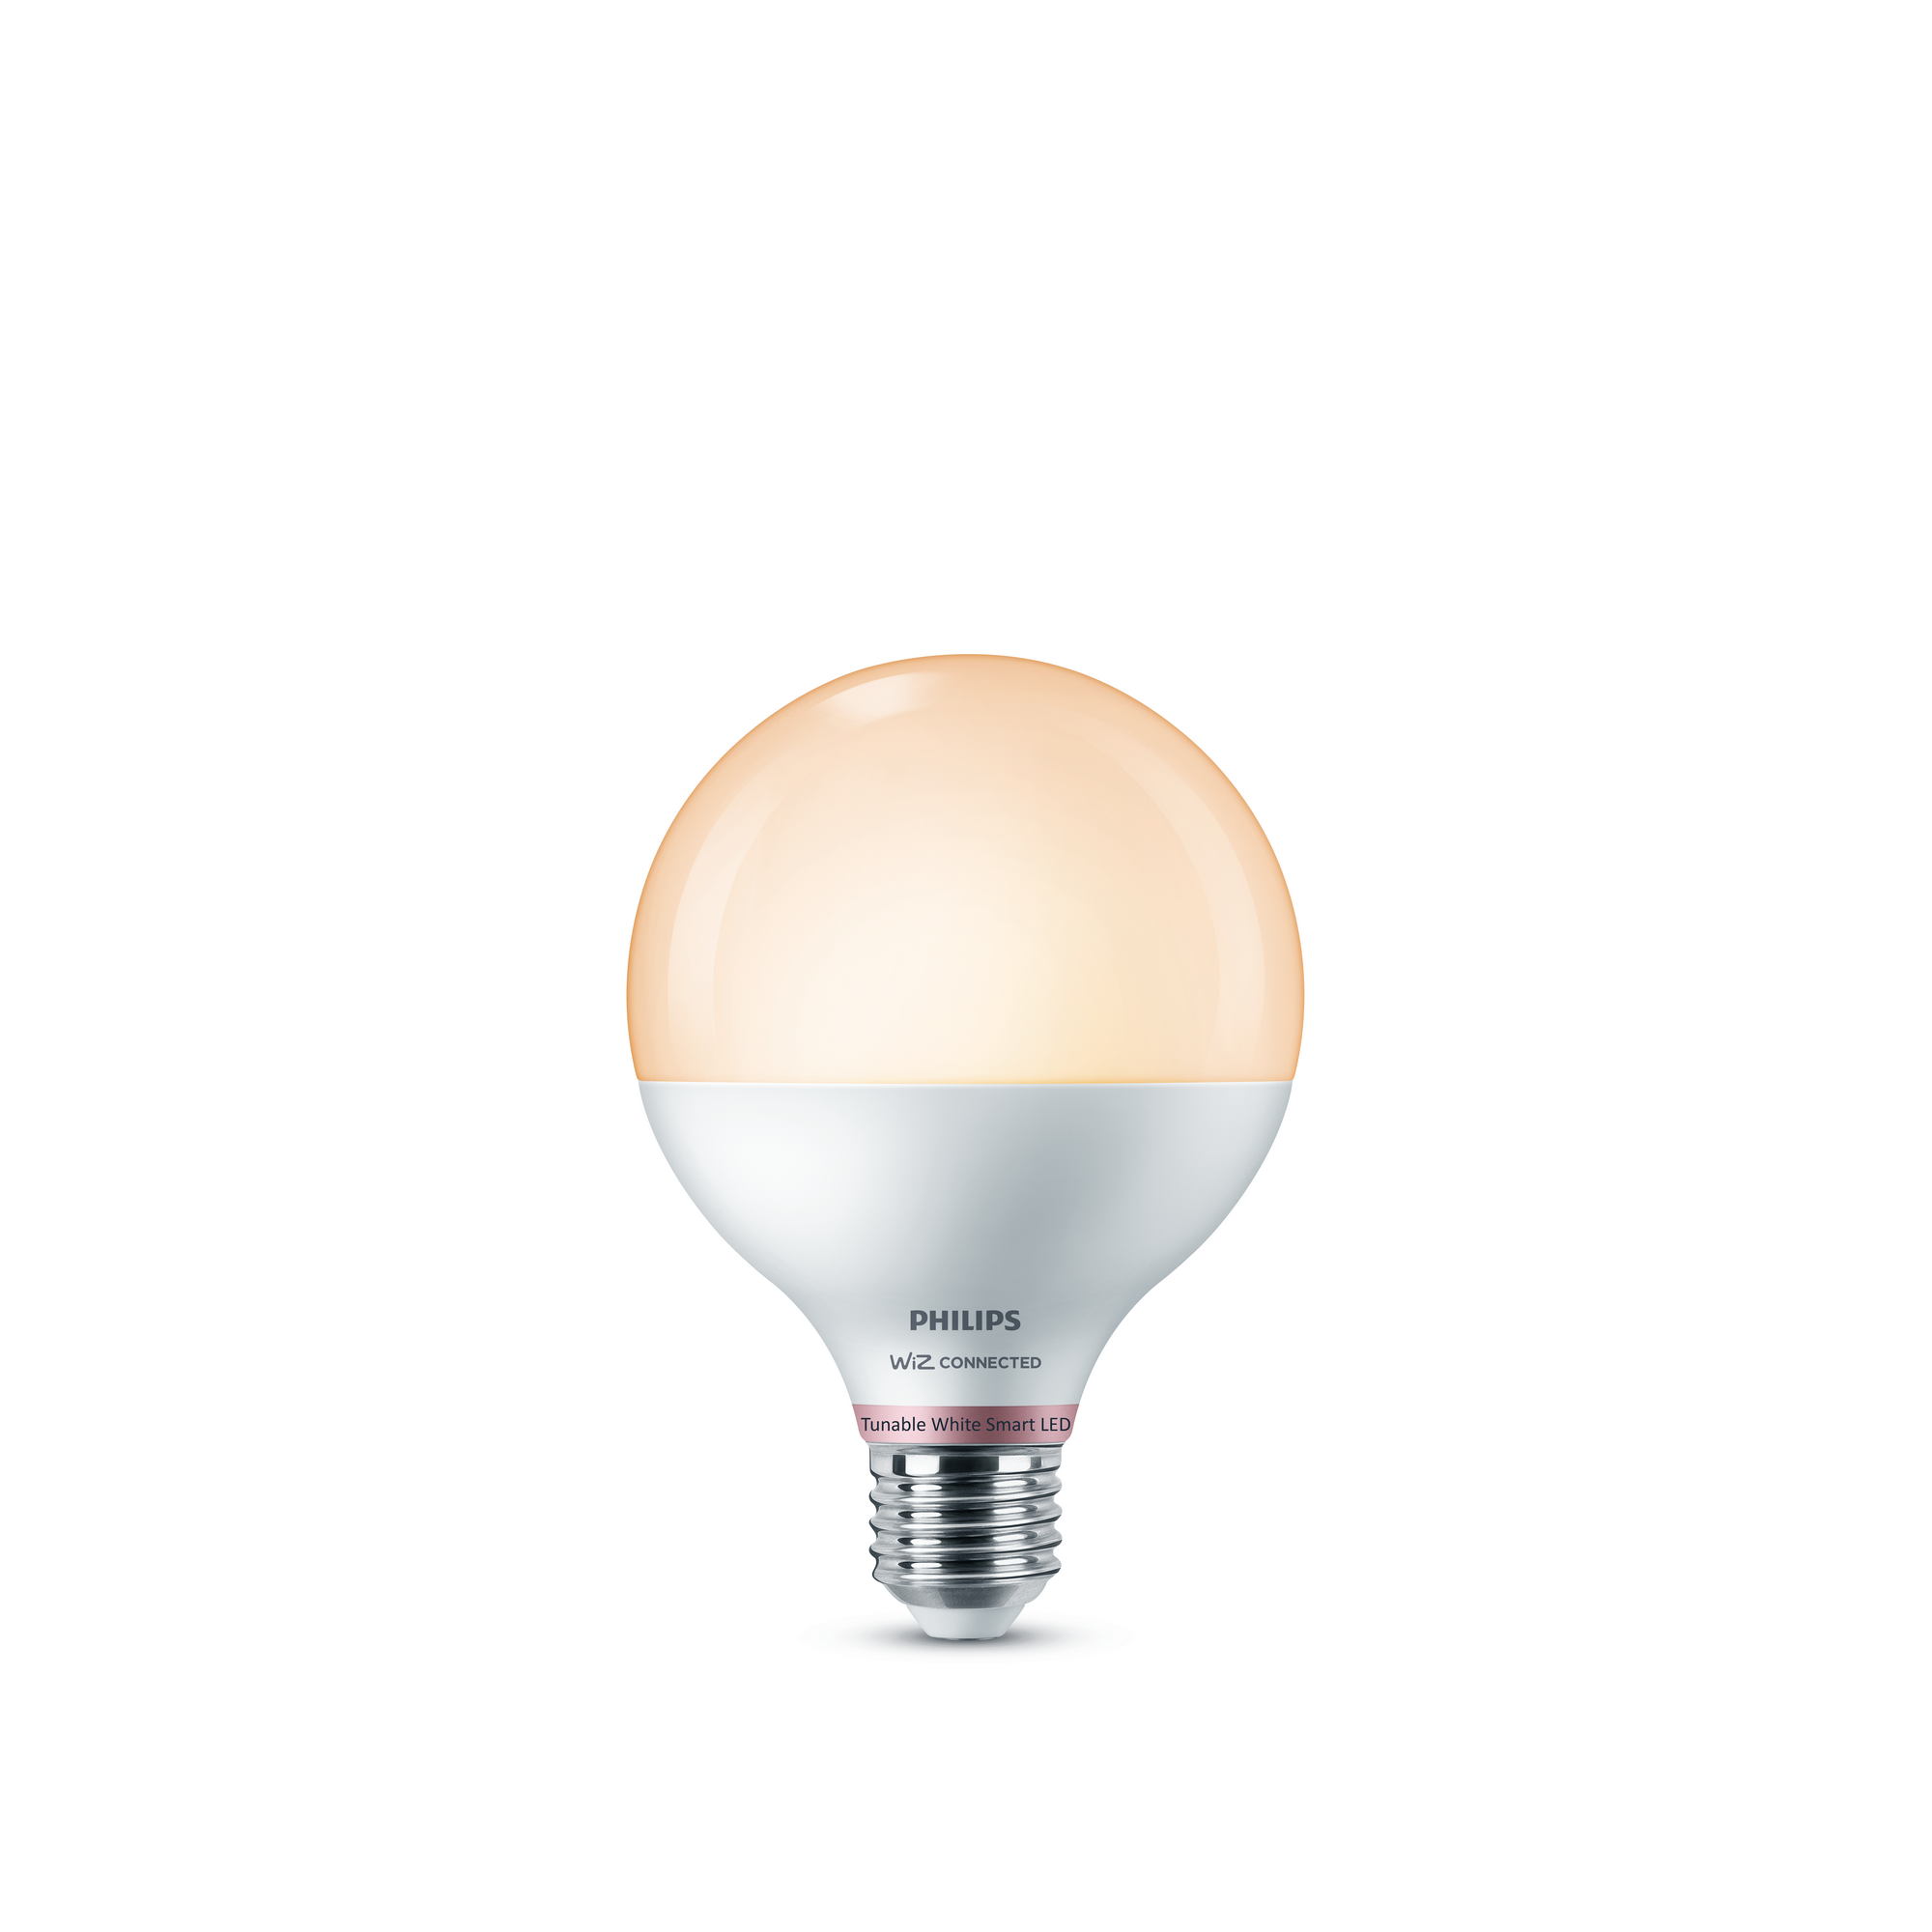 LED-Lampe 'SmartLED' 1055 lm E27 Globe weiß 2700-6500 K + product picture